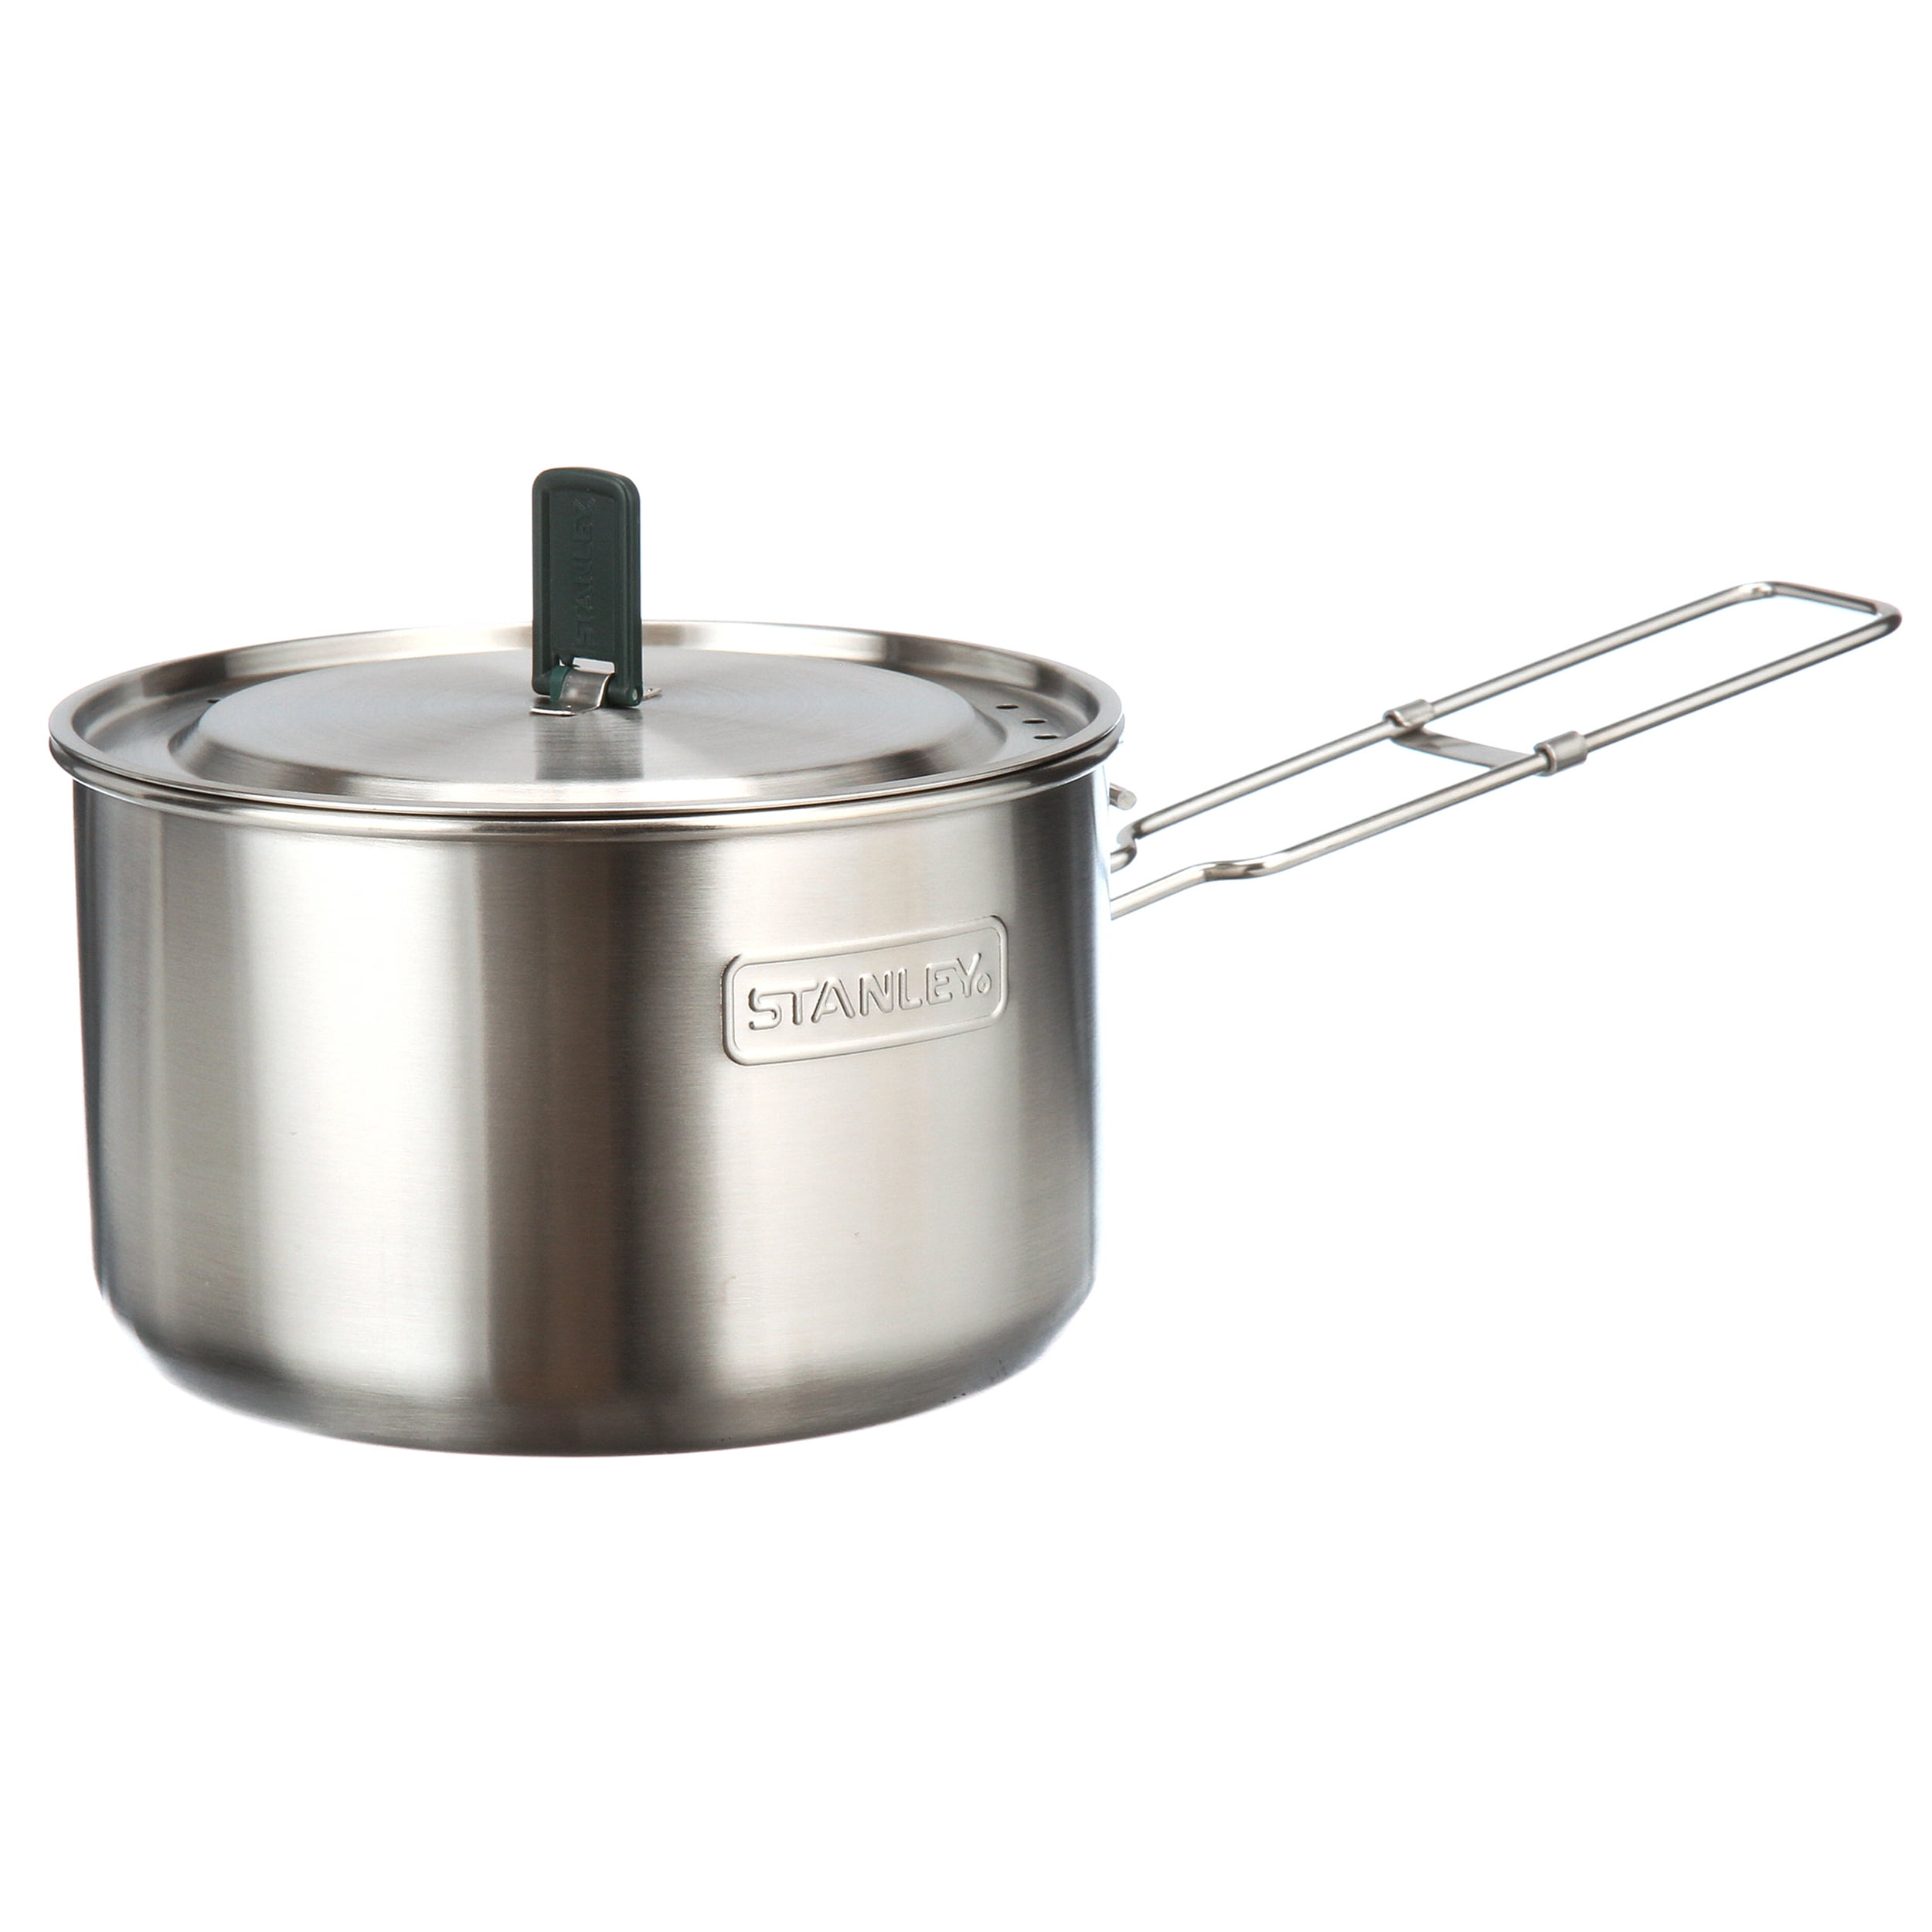 Stainless Steel 20.6 x 20.6 x 5.8 cm STANLEY Adventure Prep and Eat Frying Pan Camp Cook Set 